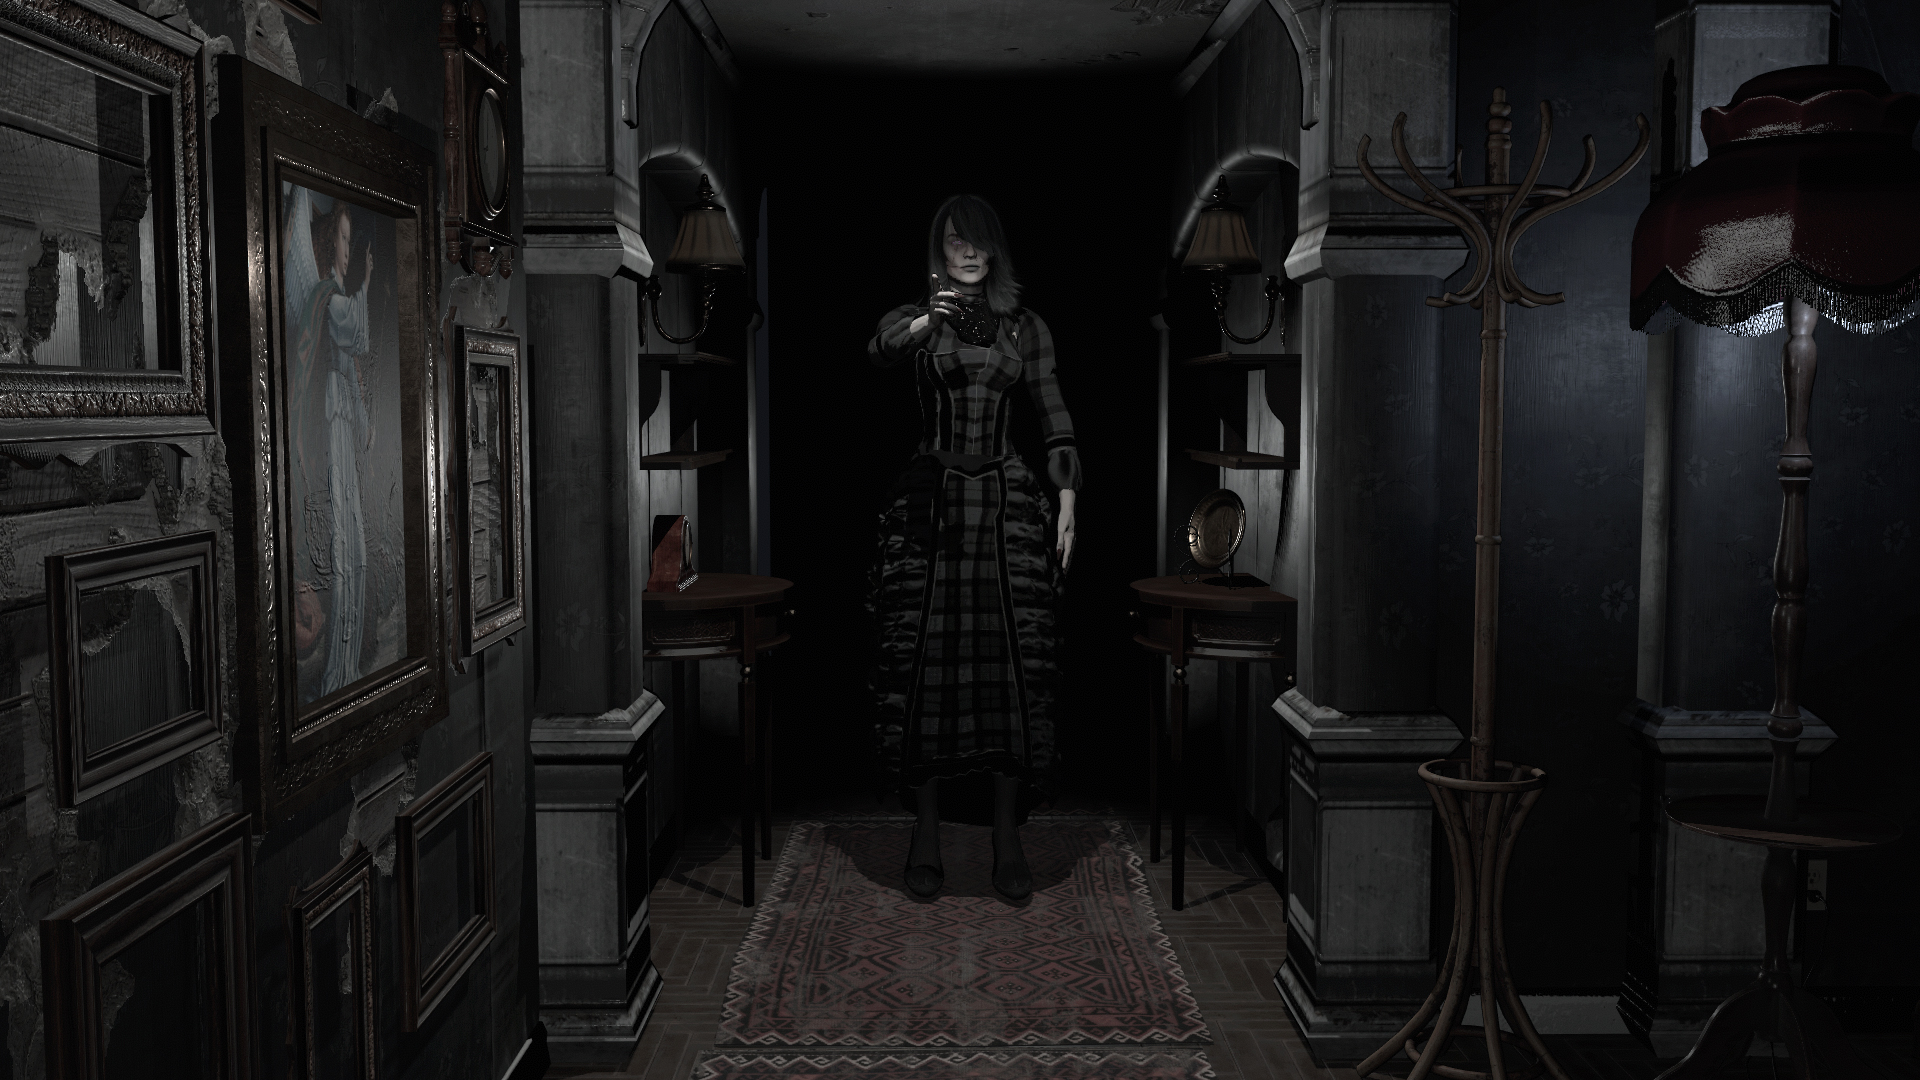 Game hour. Witching hour игра. Witch игра хоррор. Haunting hour игра. Hour of the Witch DLC.